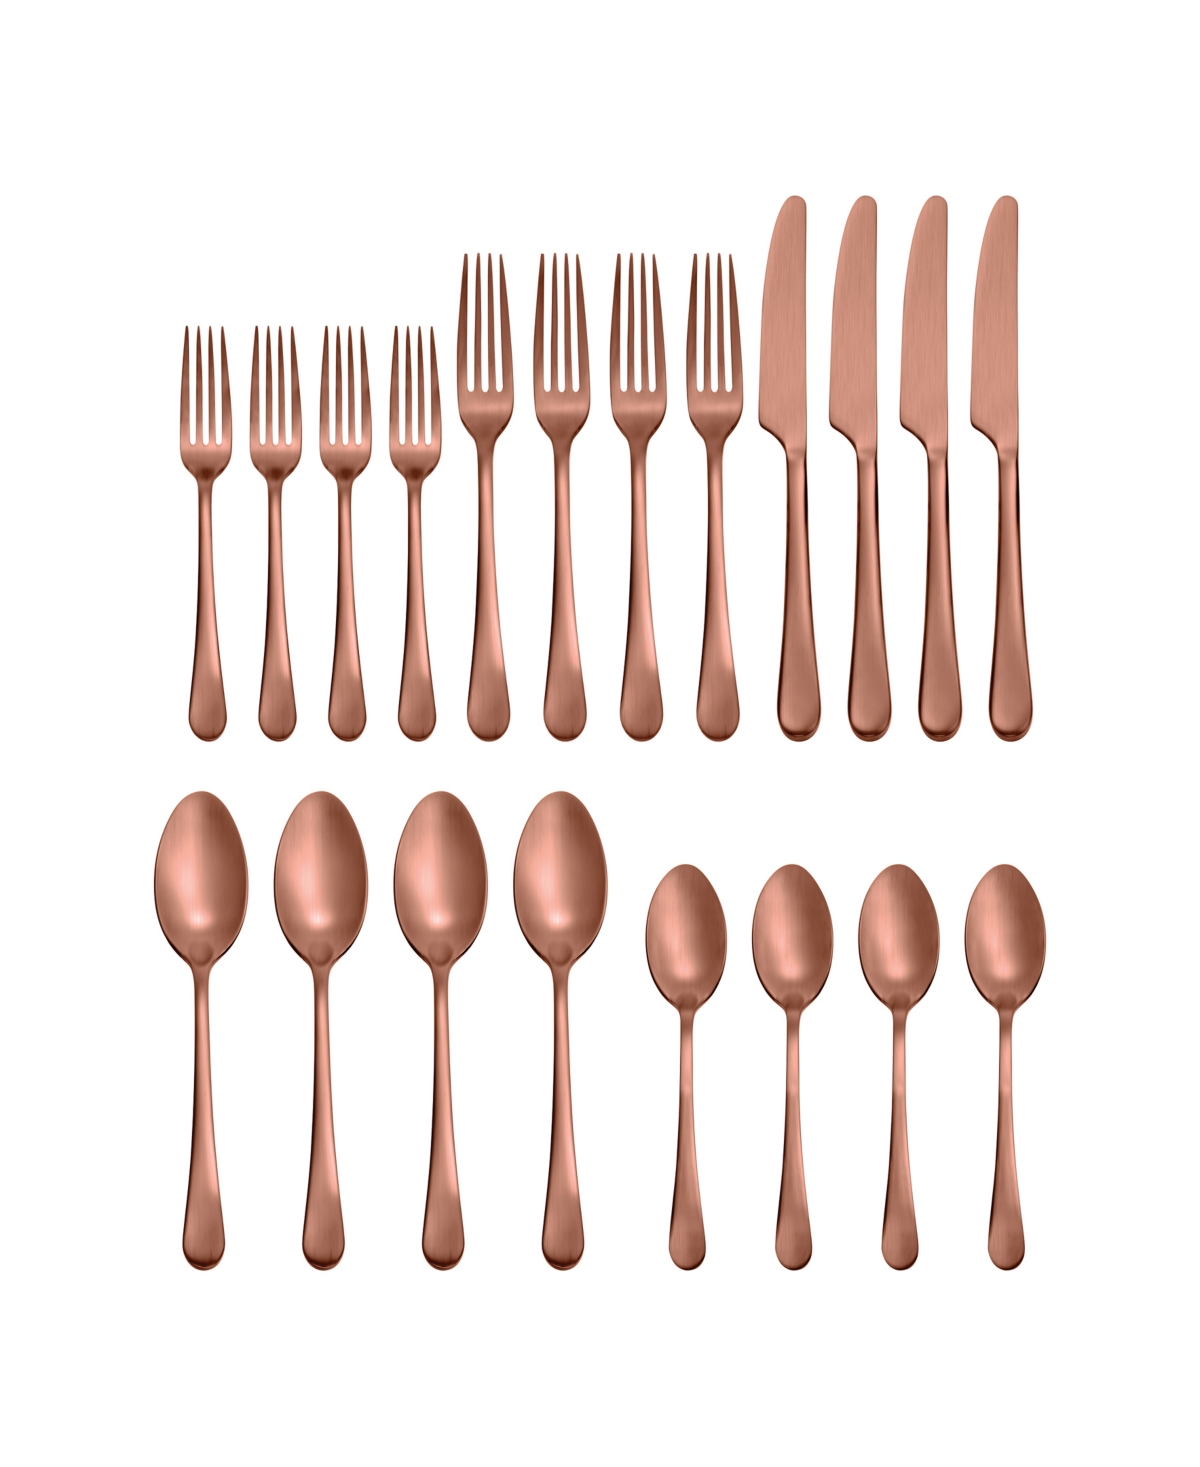 Hampton Forge Mirabella Satin Copper Titanium 18/0 Stainless Steel 20 Piece Set, Service For 4 In Metallic And Copper